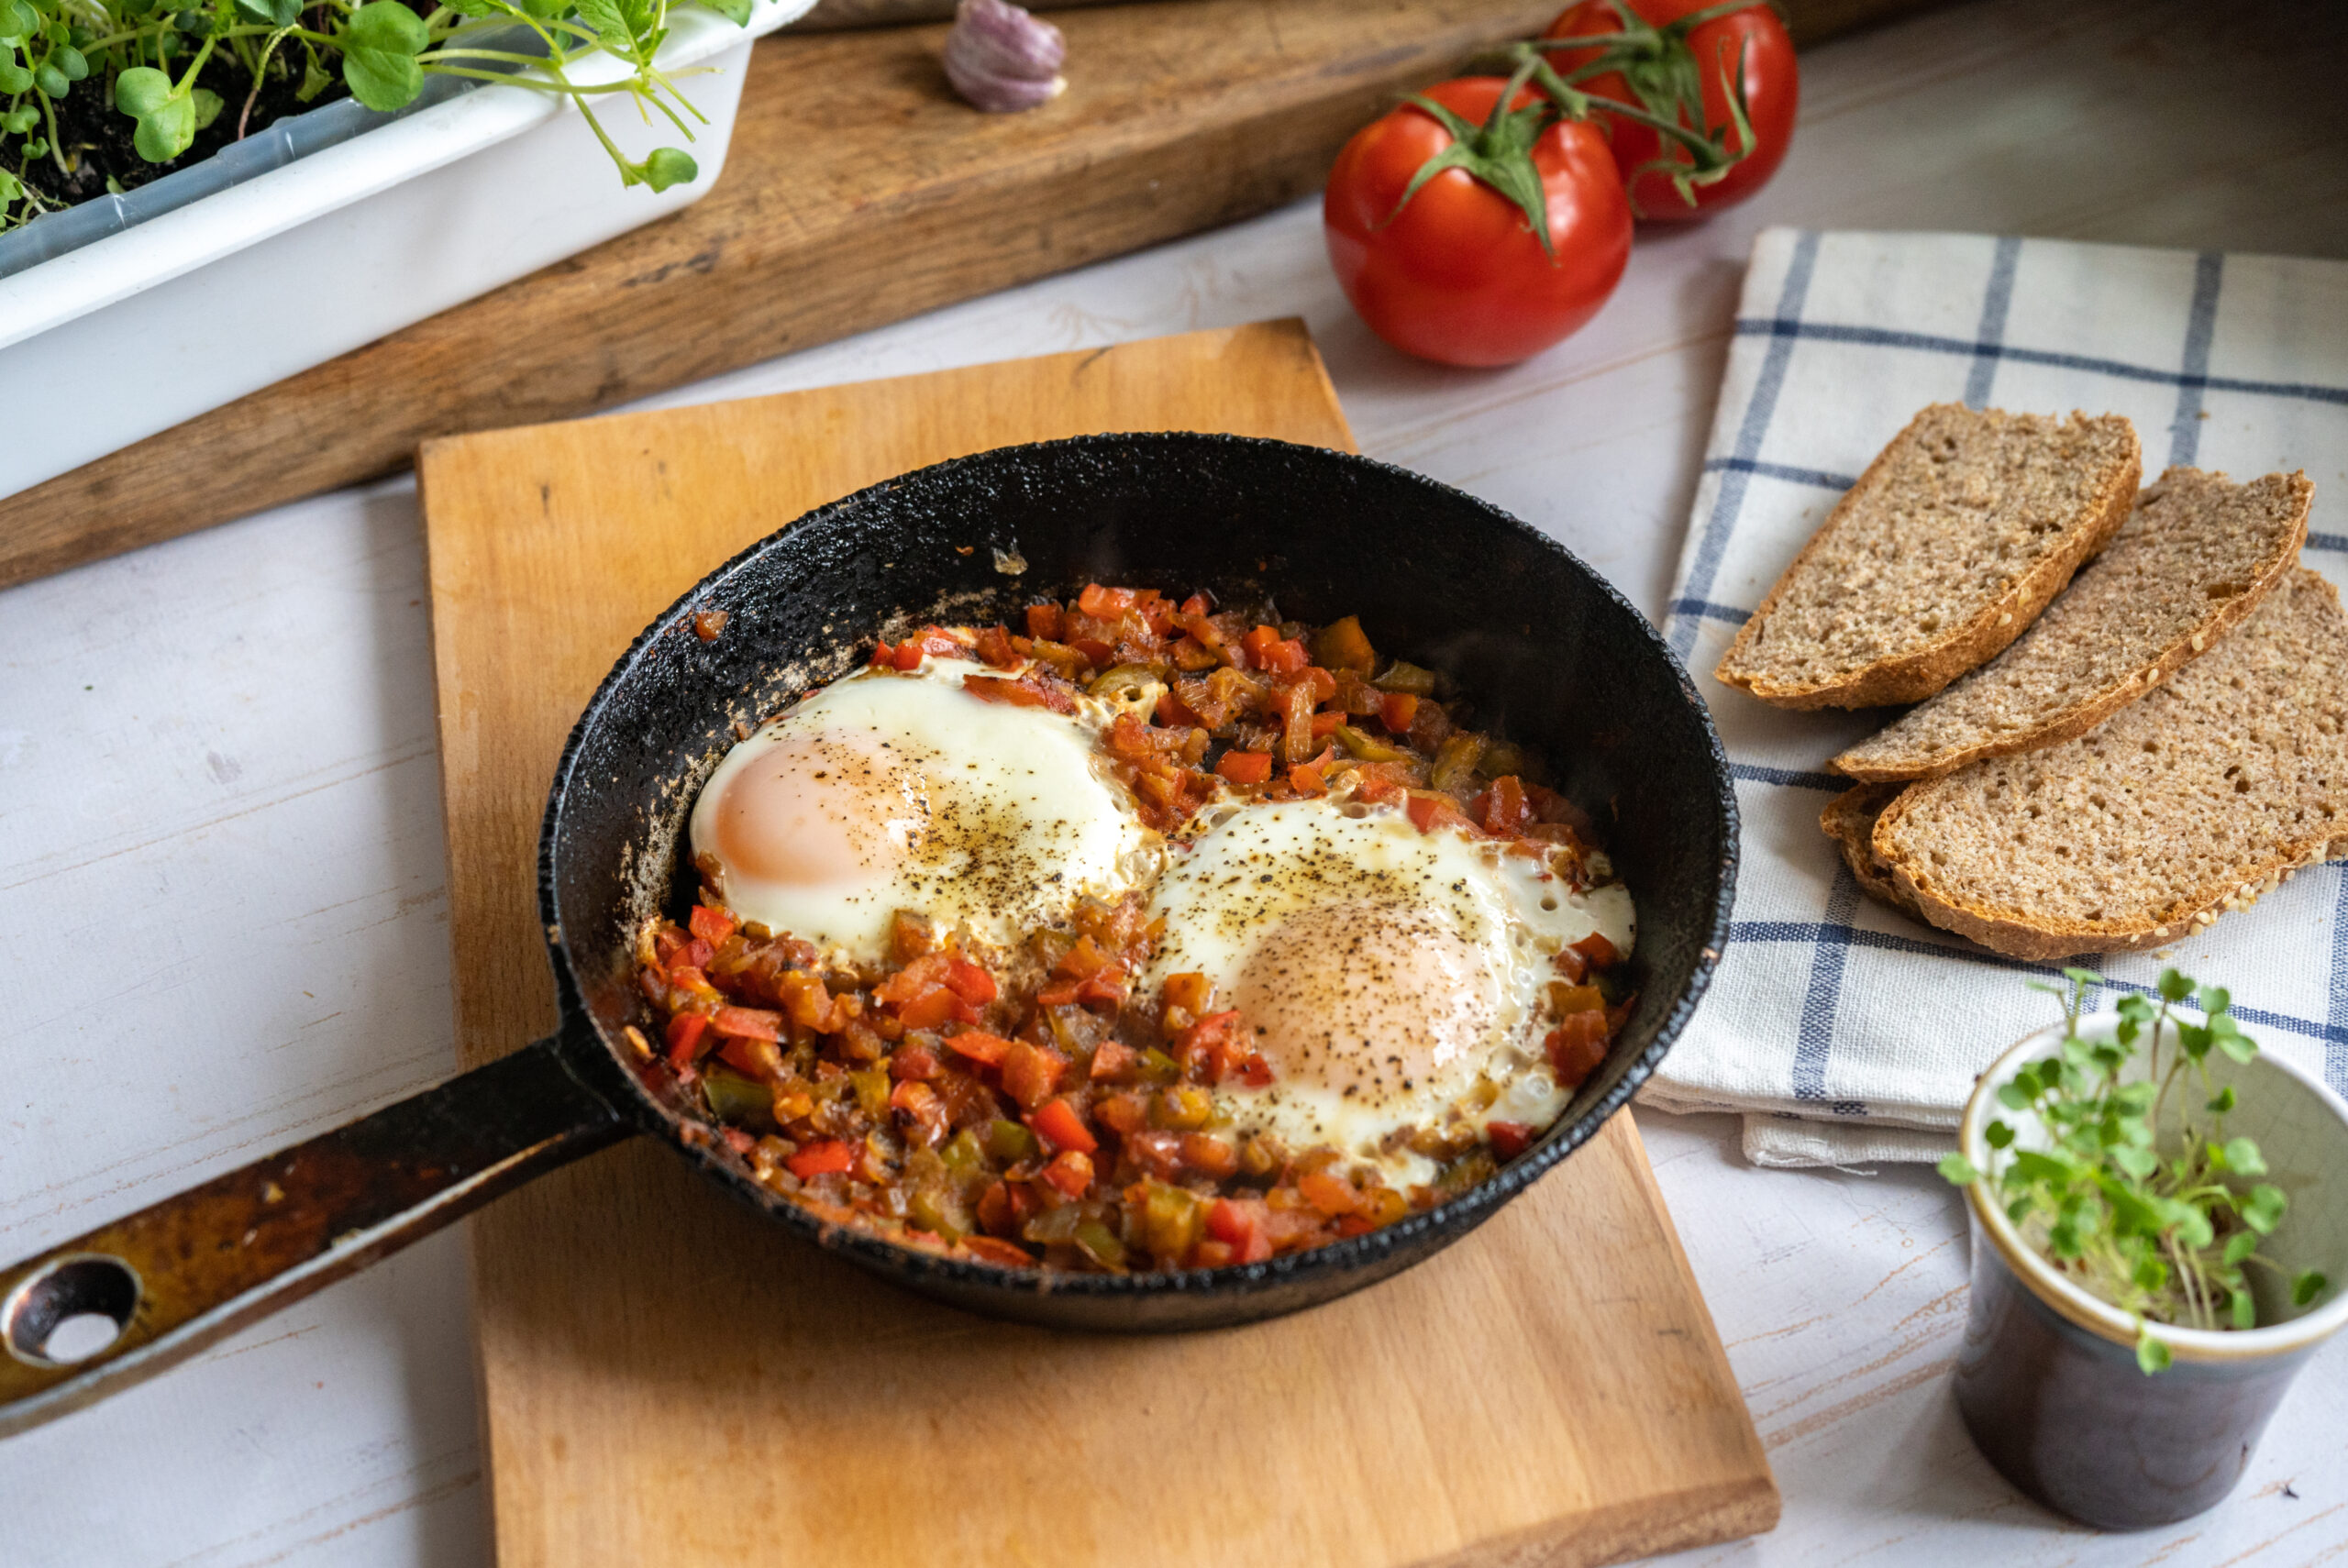 Vegetable and Egg Skillet Recipe, a hearty yet healthy dish.